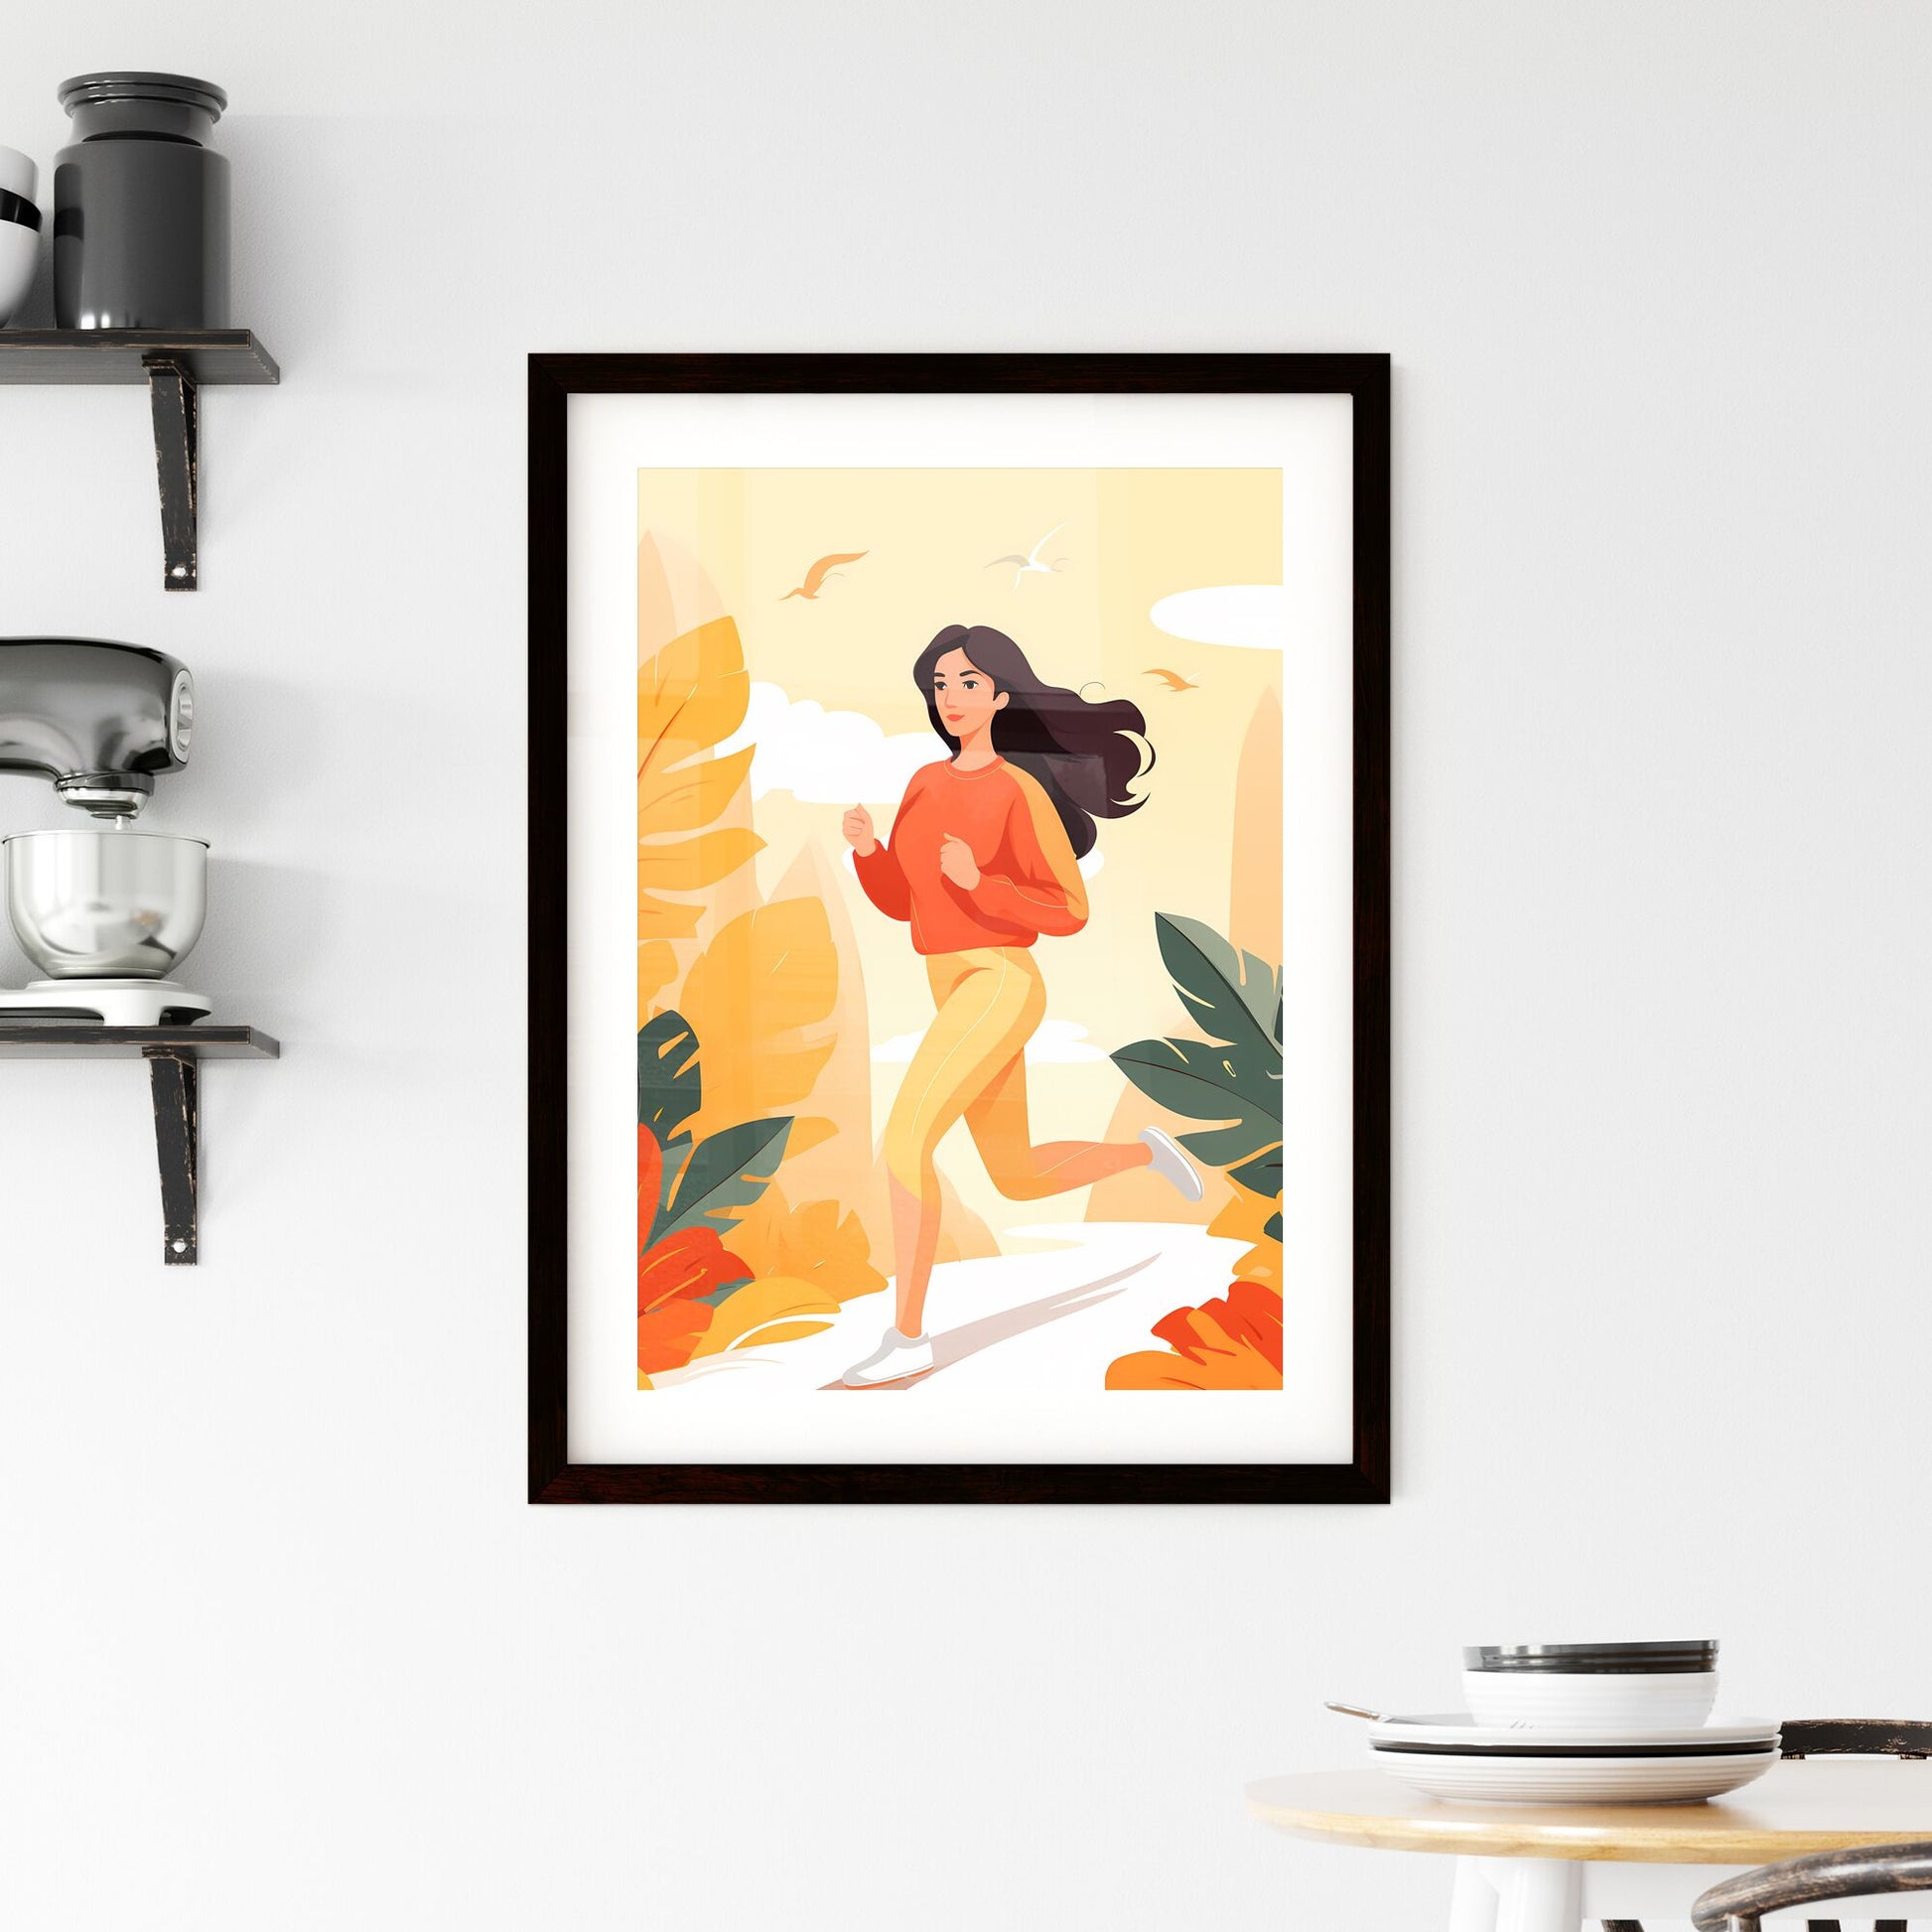 Sweat it out! - Art print of a woman running in the woods Default Title